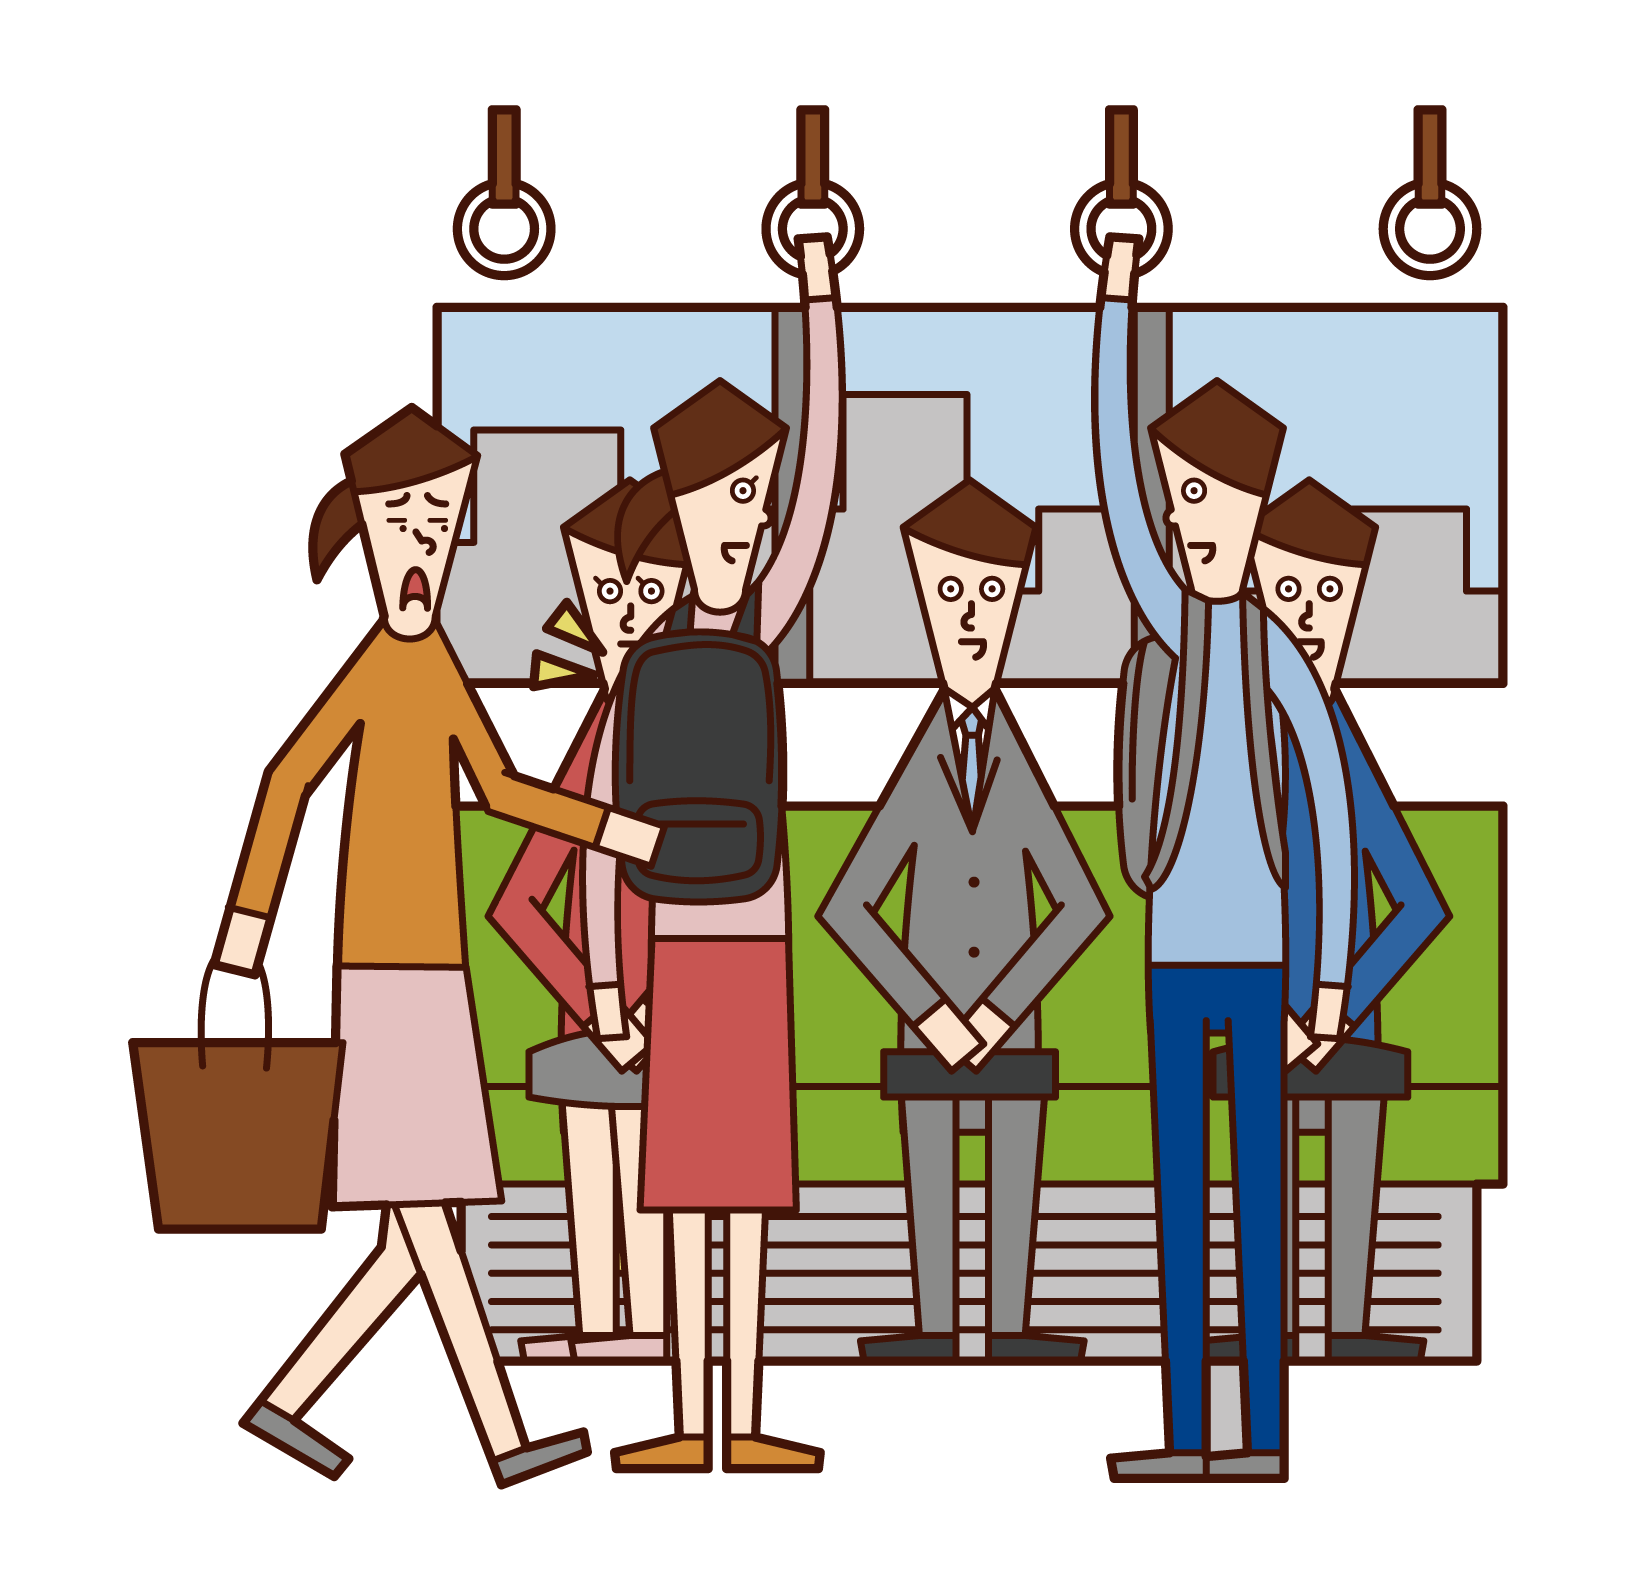 Illustration of passenger prioritizing people who get off the train